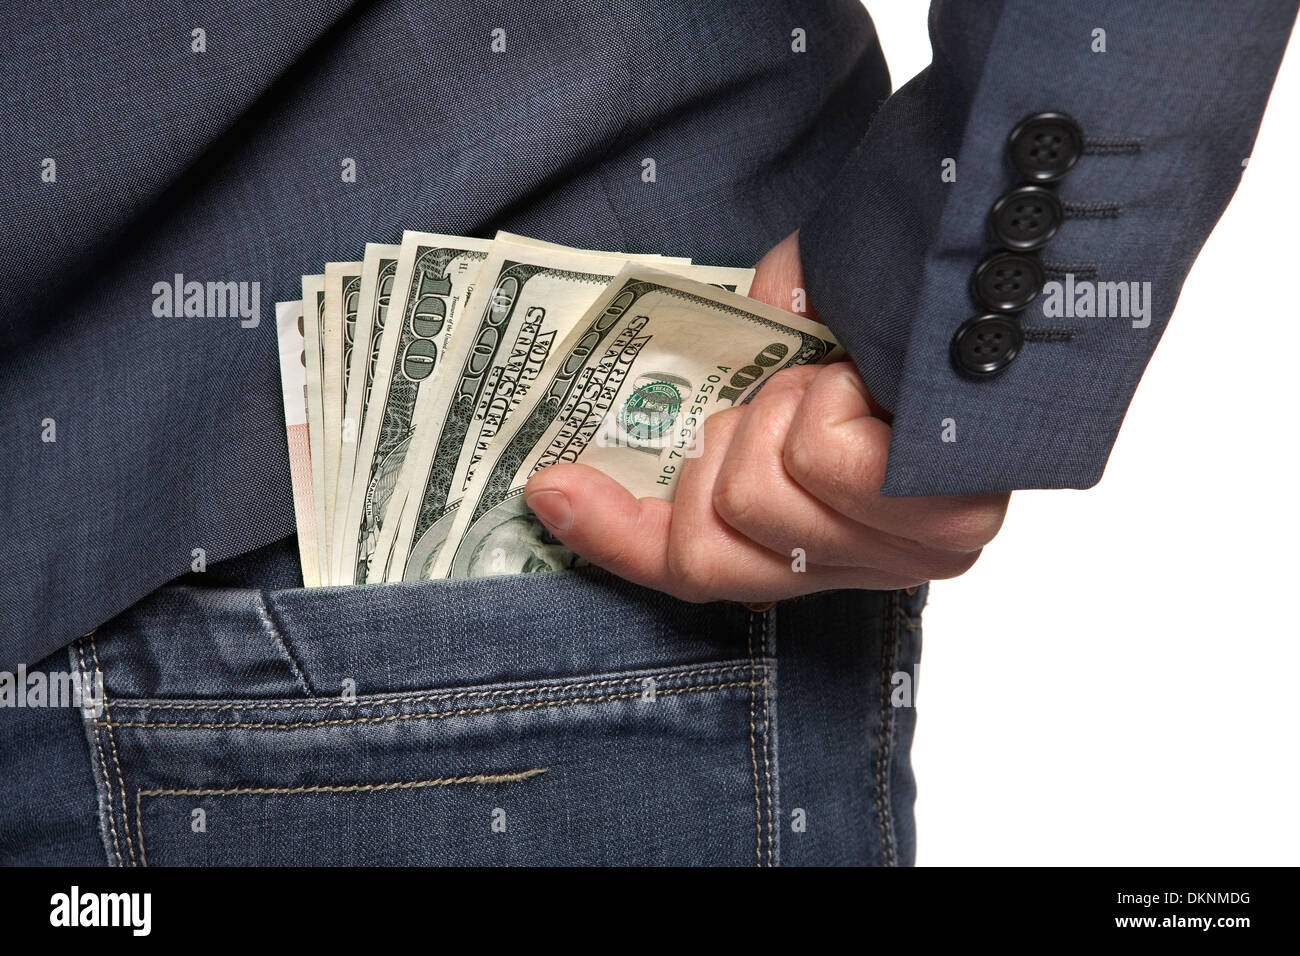 Male hand draws out a money from the pocket of jeans, close-up Stock Photo